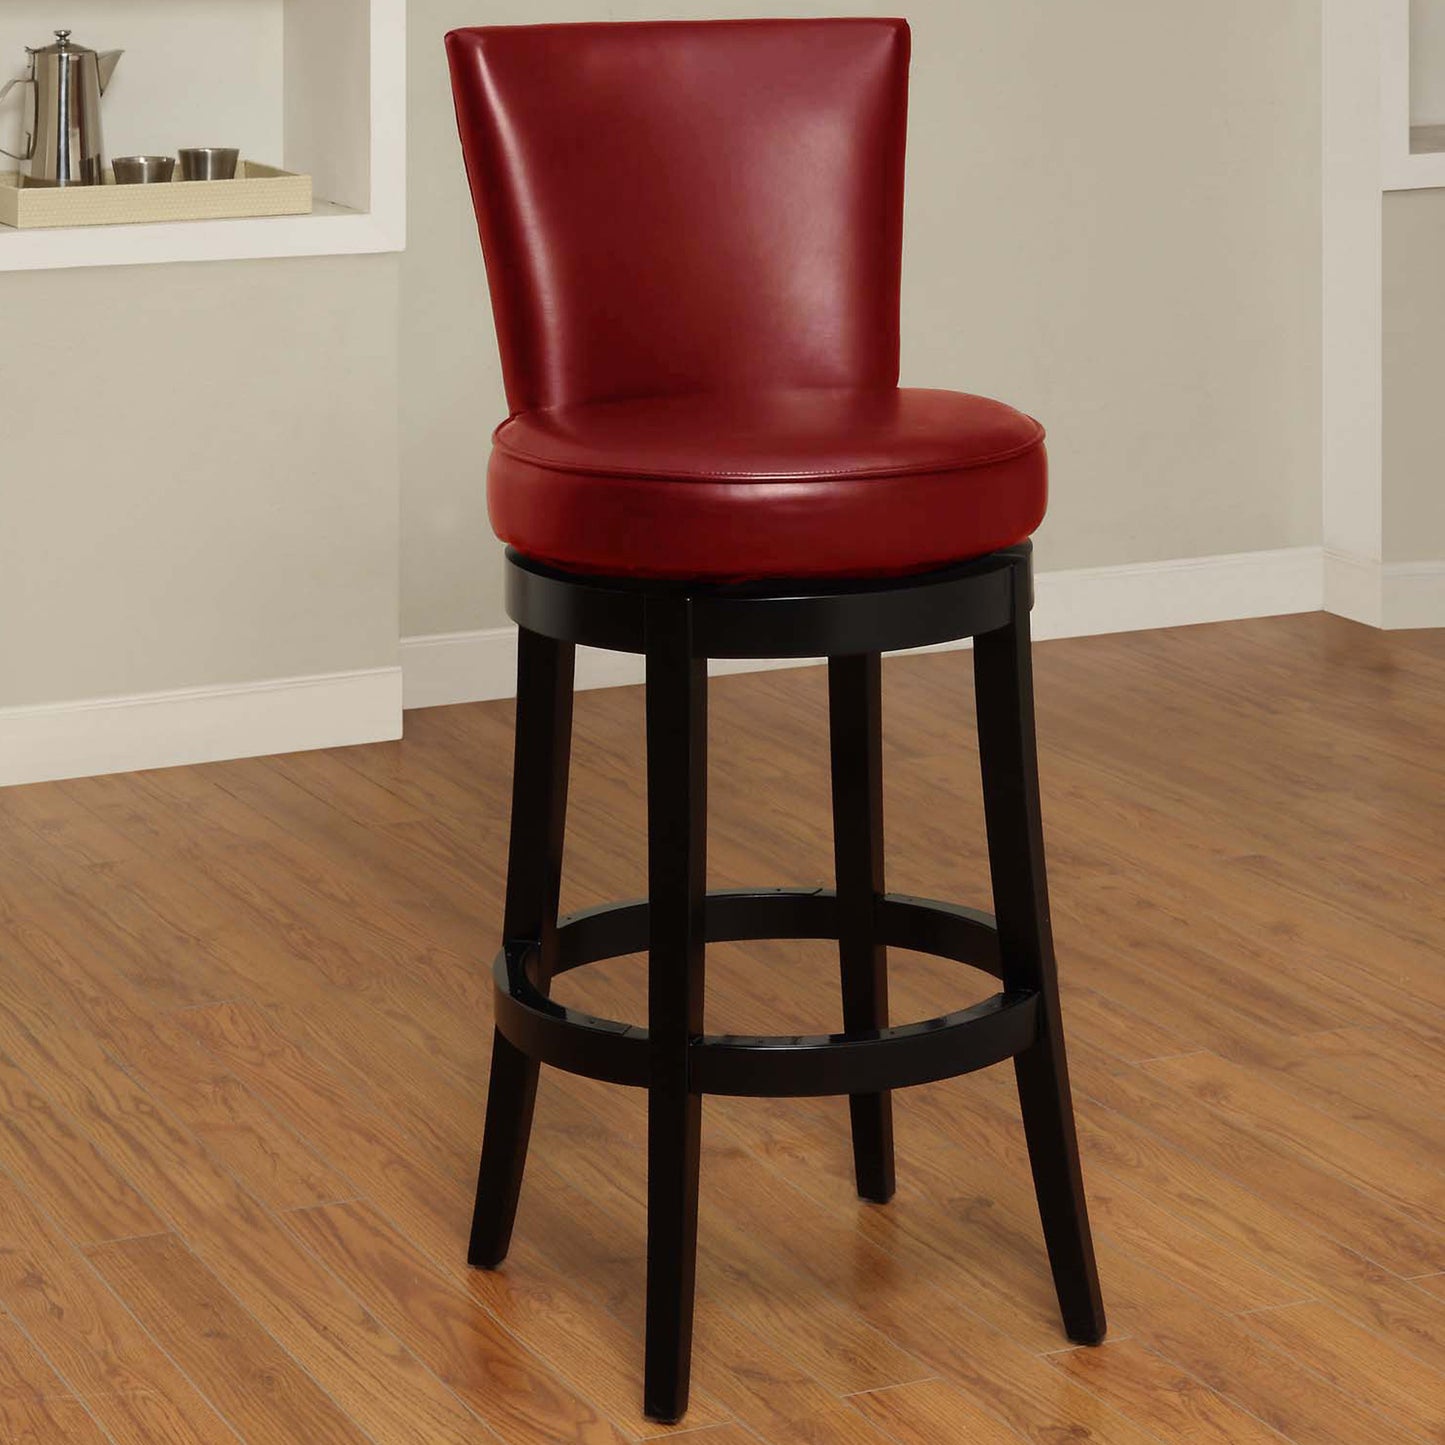 26" Red Faux Leather Round Seat Black Wood Swivel Armless Bar Stool